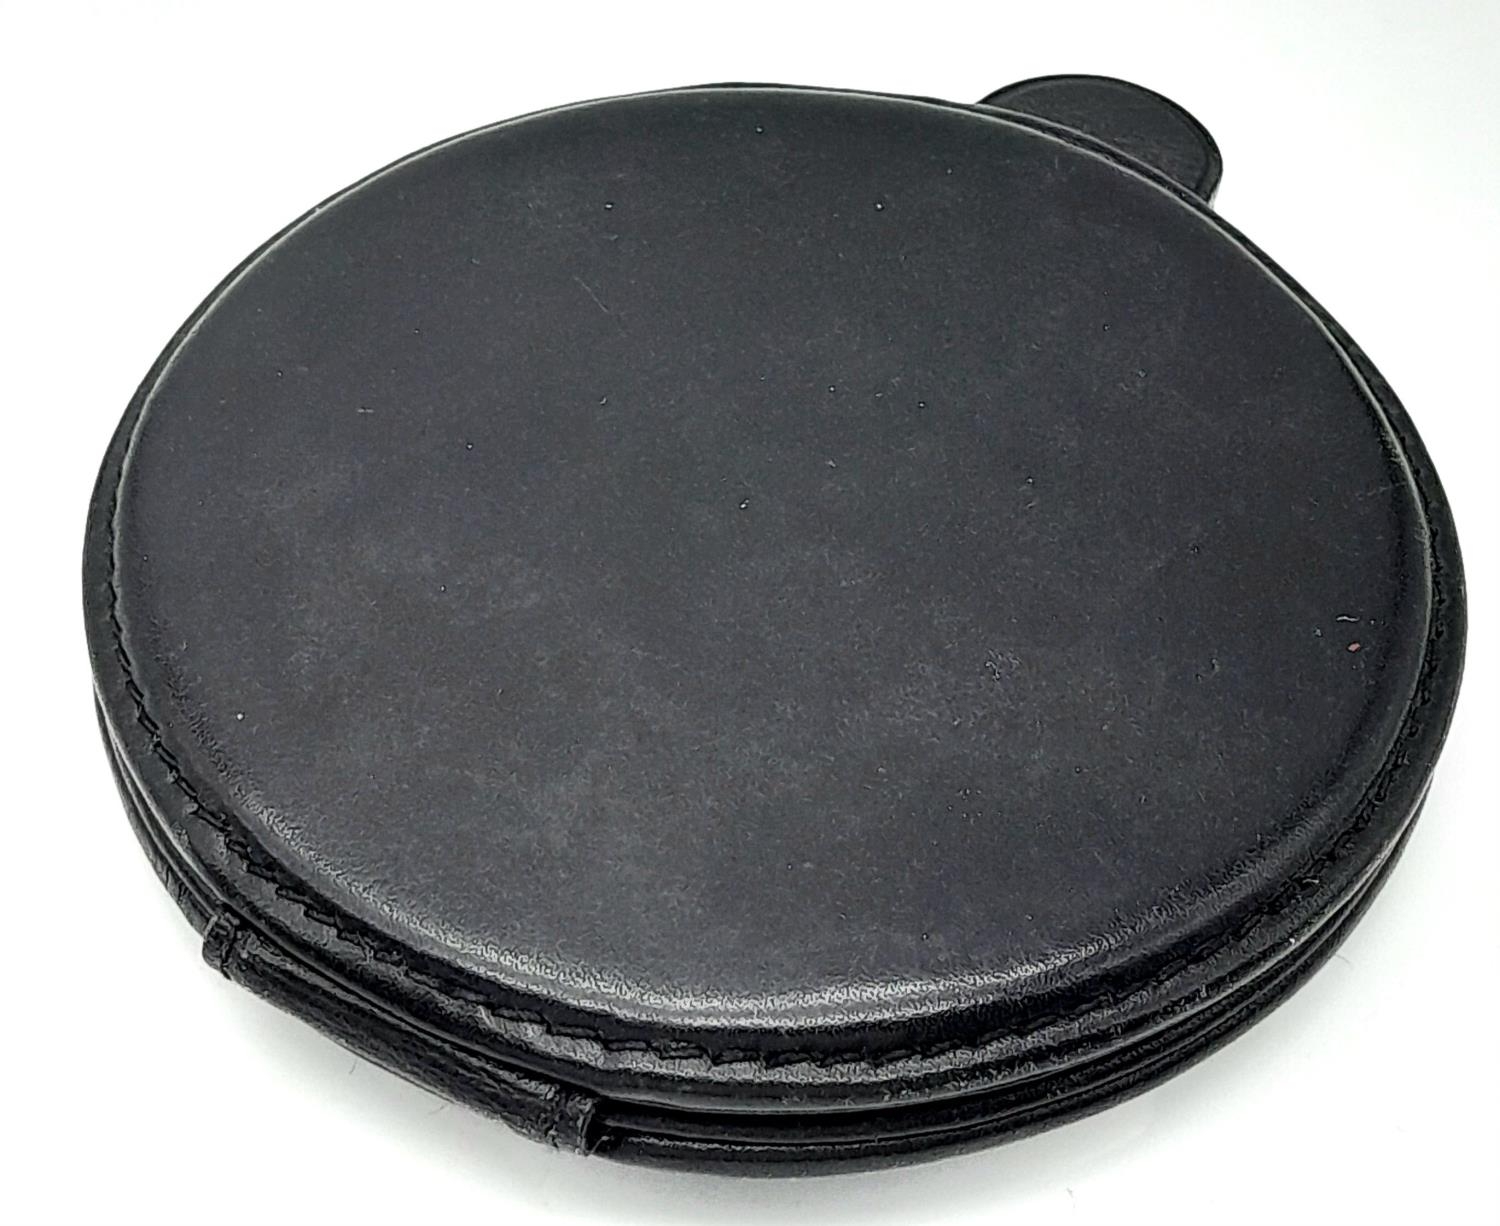 A vintage, CARTIER PANTHER double vanity mirror in a soft black leather cover, diameter: 9 cm. - Image 3 of 6